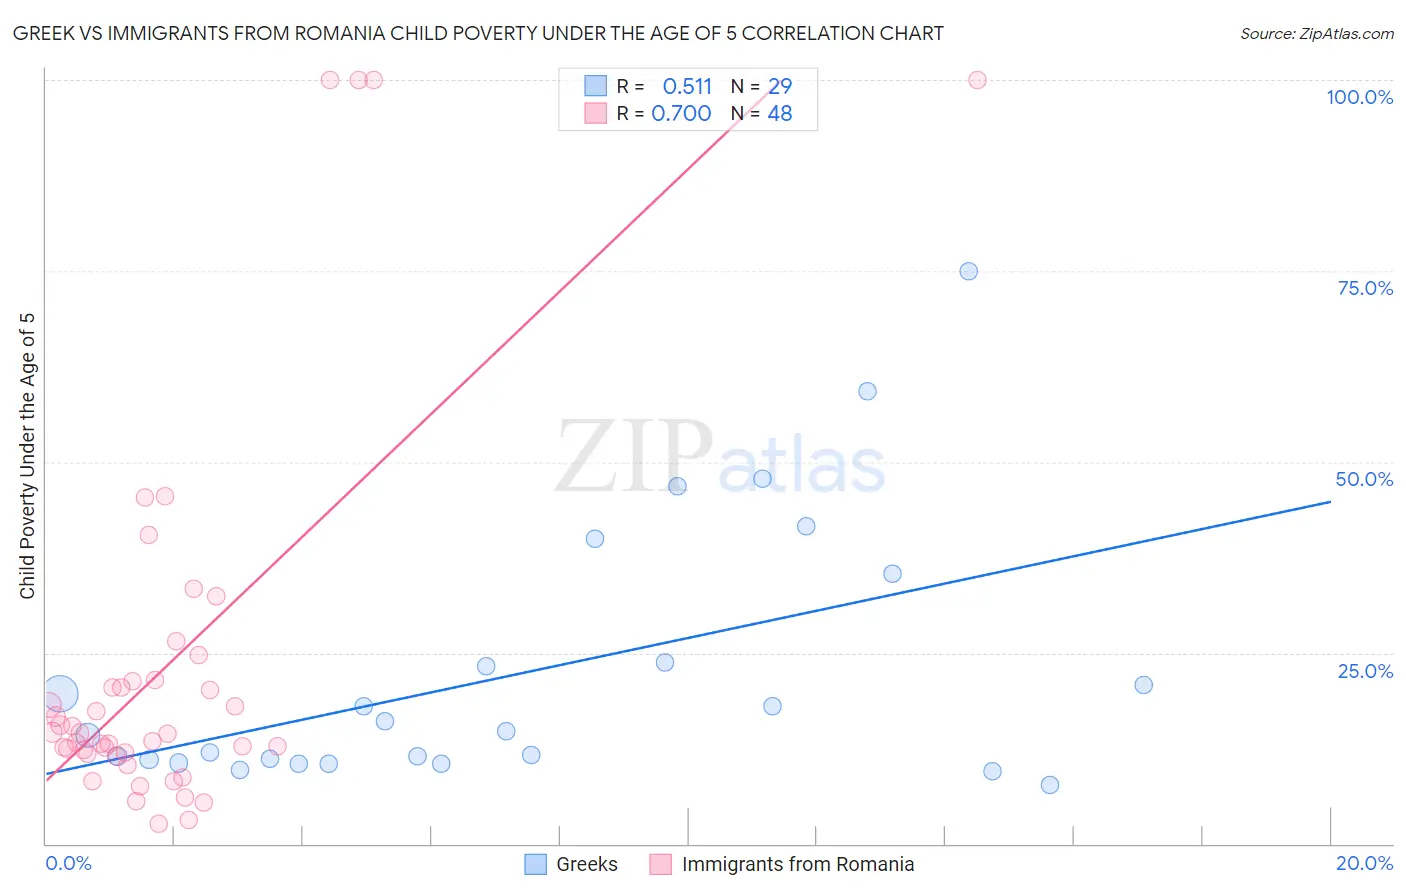 Greek vs Immigrants from Romania Child Poverty Under the Age of 5